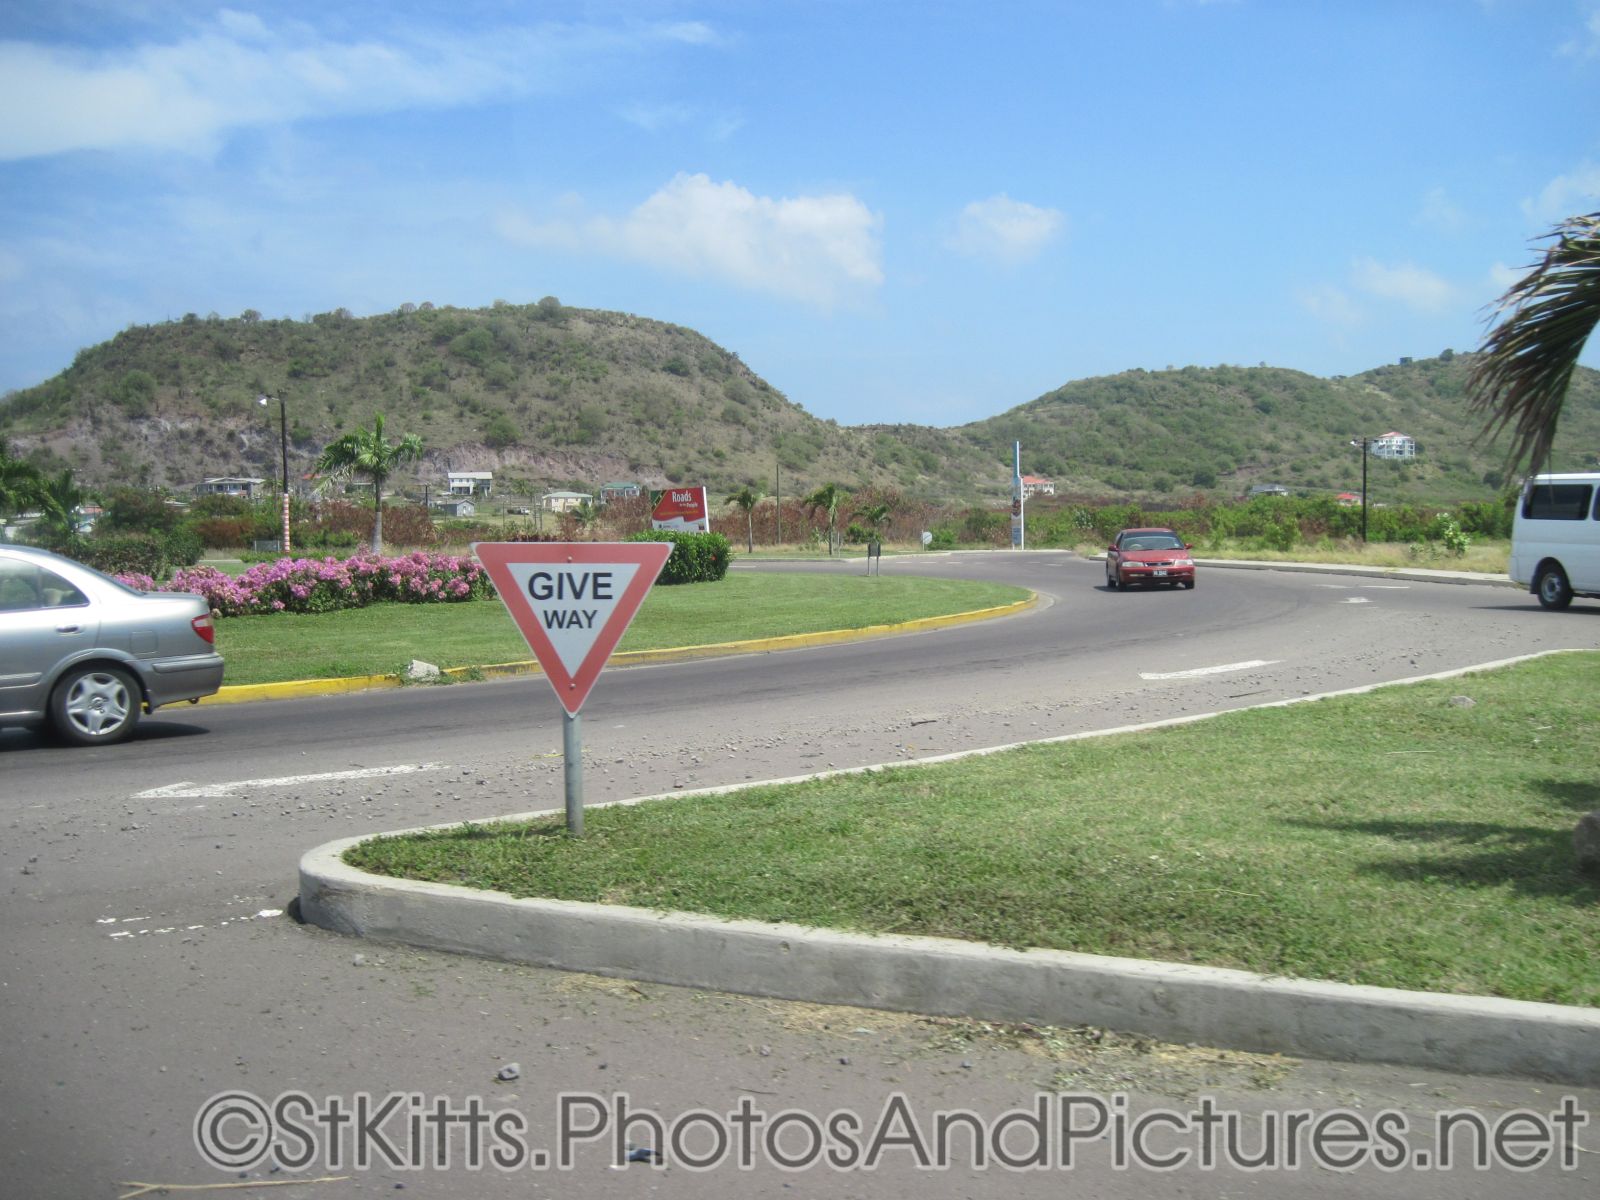 Give Way Yield Sign at a roundabount in St Kitts.jpg
